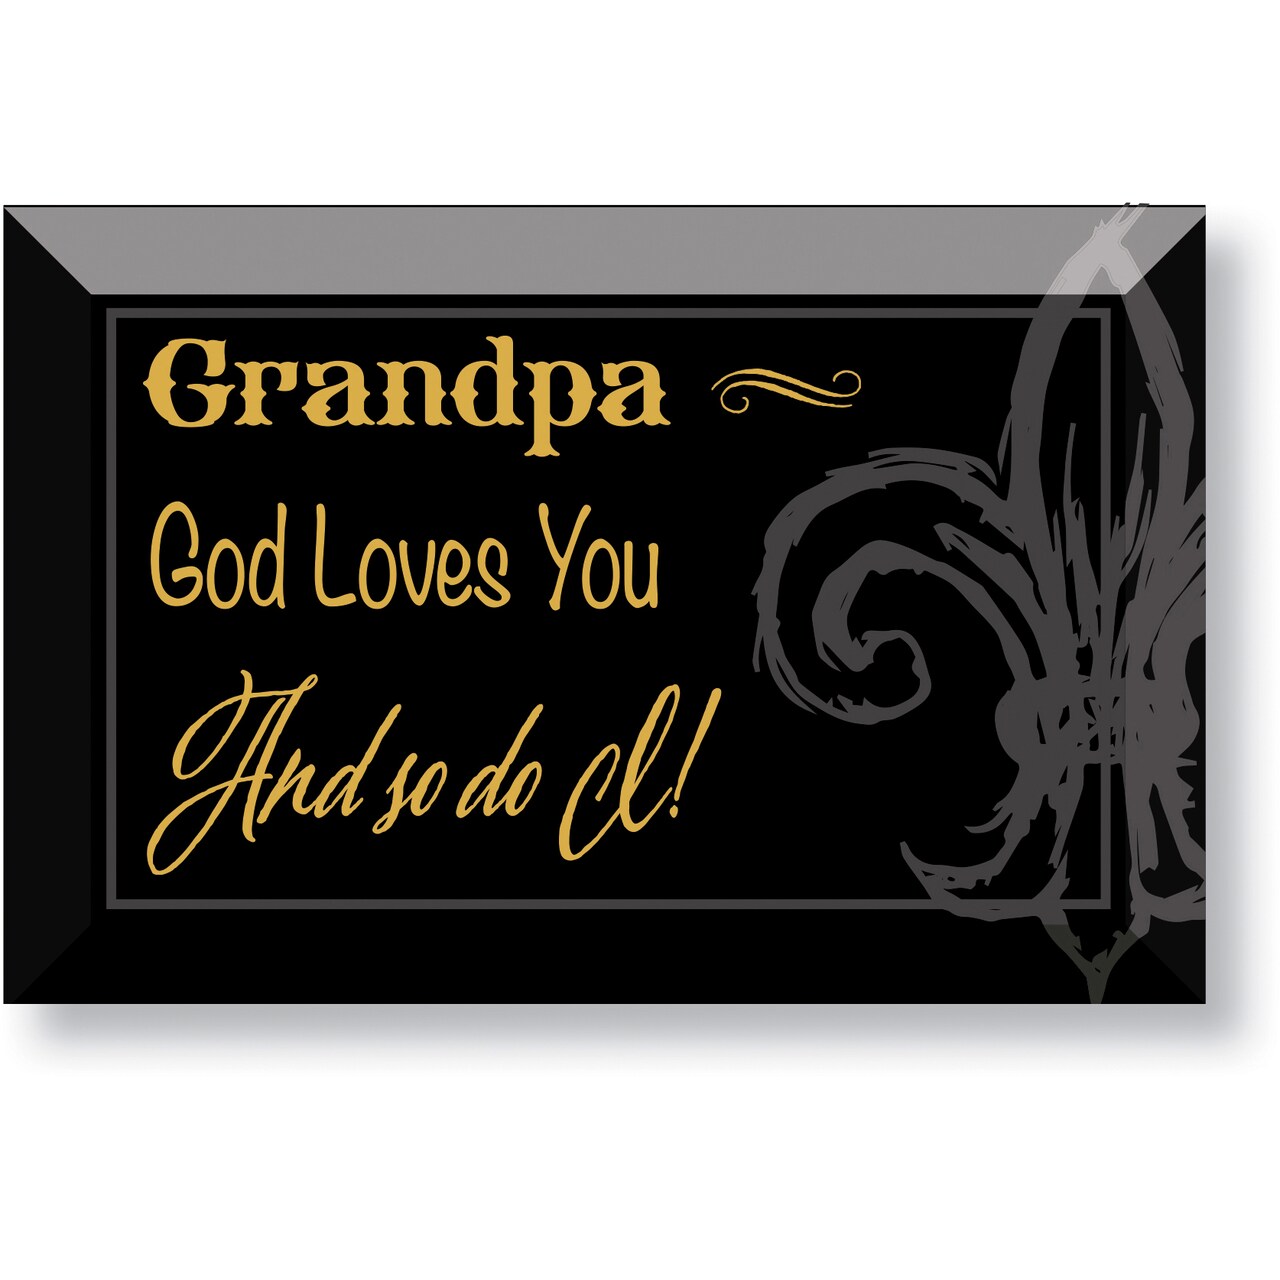 Dexsa Grandpa God loves you and so do I! Glass Plaque with Easel - 6&#x22; x 4&#x22;